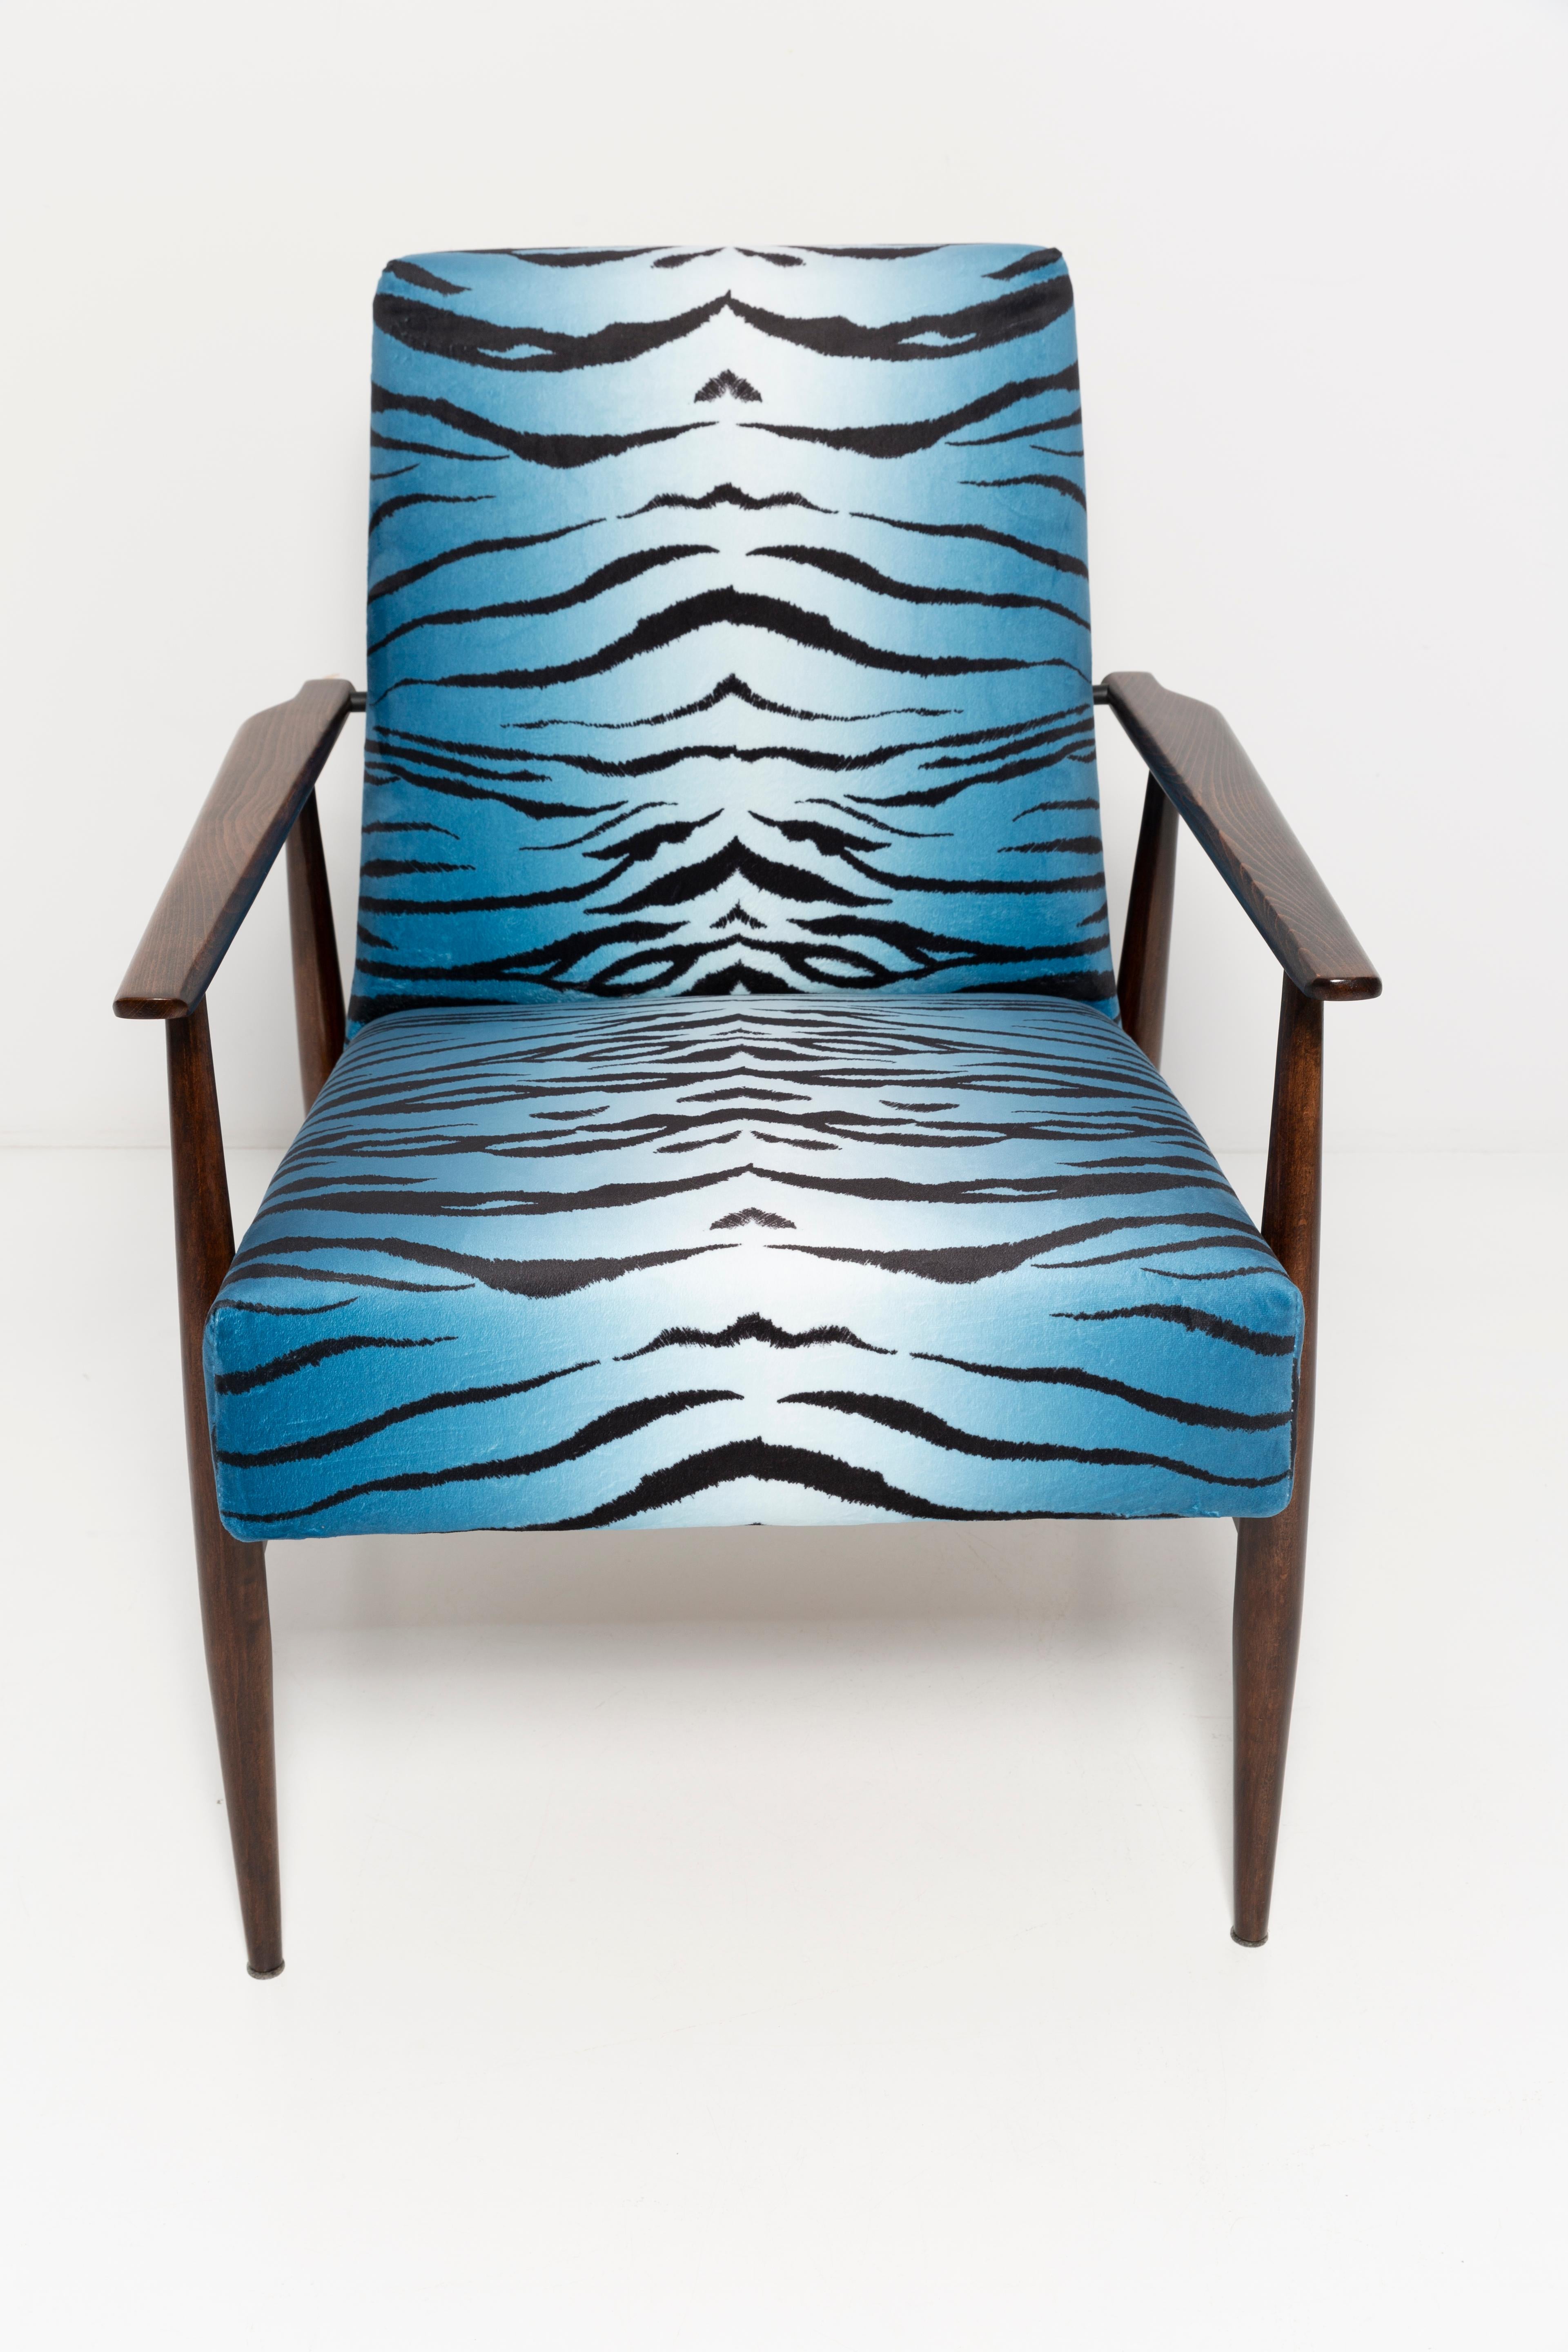 Hand-Crafted Set of Two Midcentury Blue Zebra Print Velvet Dante Armchairs, H. Lis, 1960s For Sale